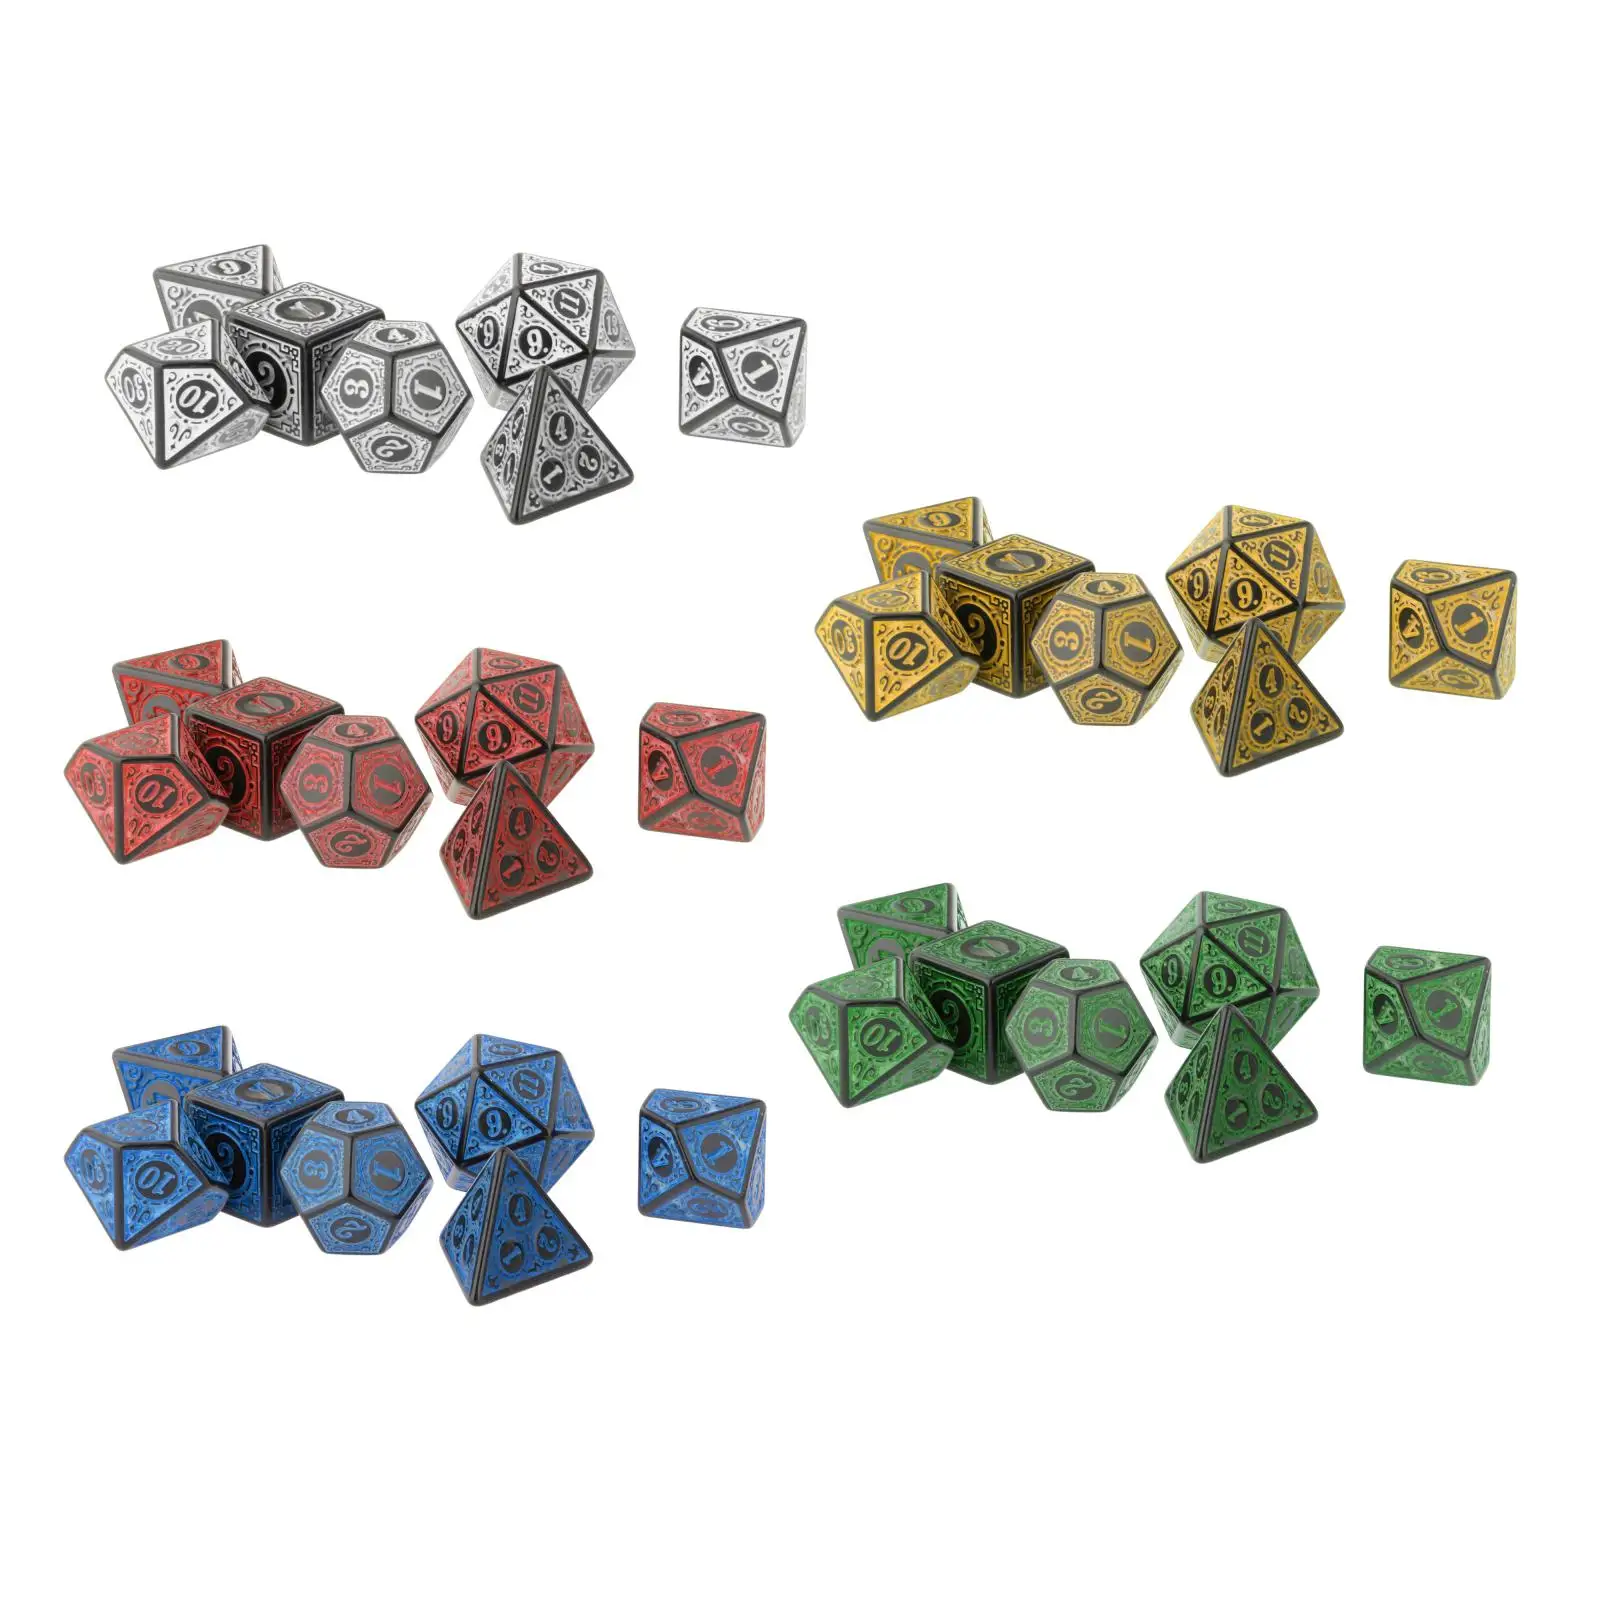 7 Pieces Dice Set, DND Polyhedral Dice Set for DND Role Playing Games and Table Games